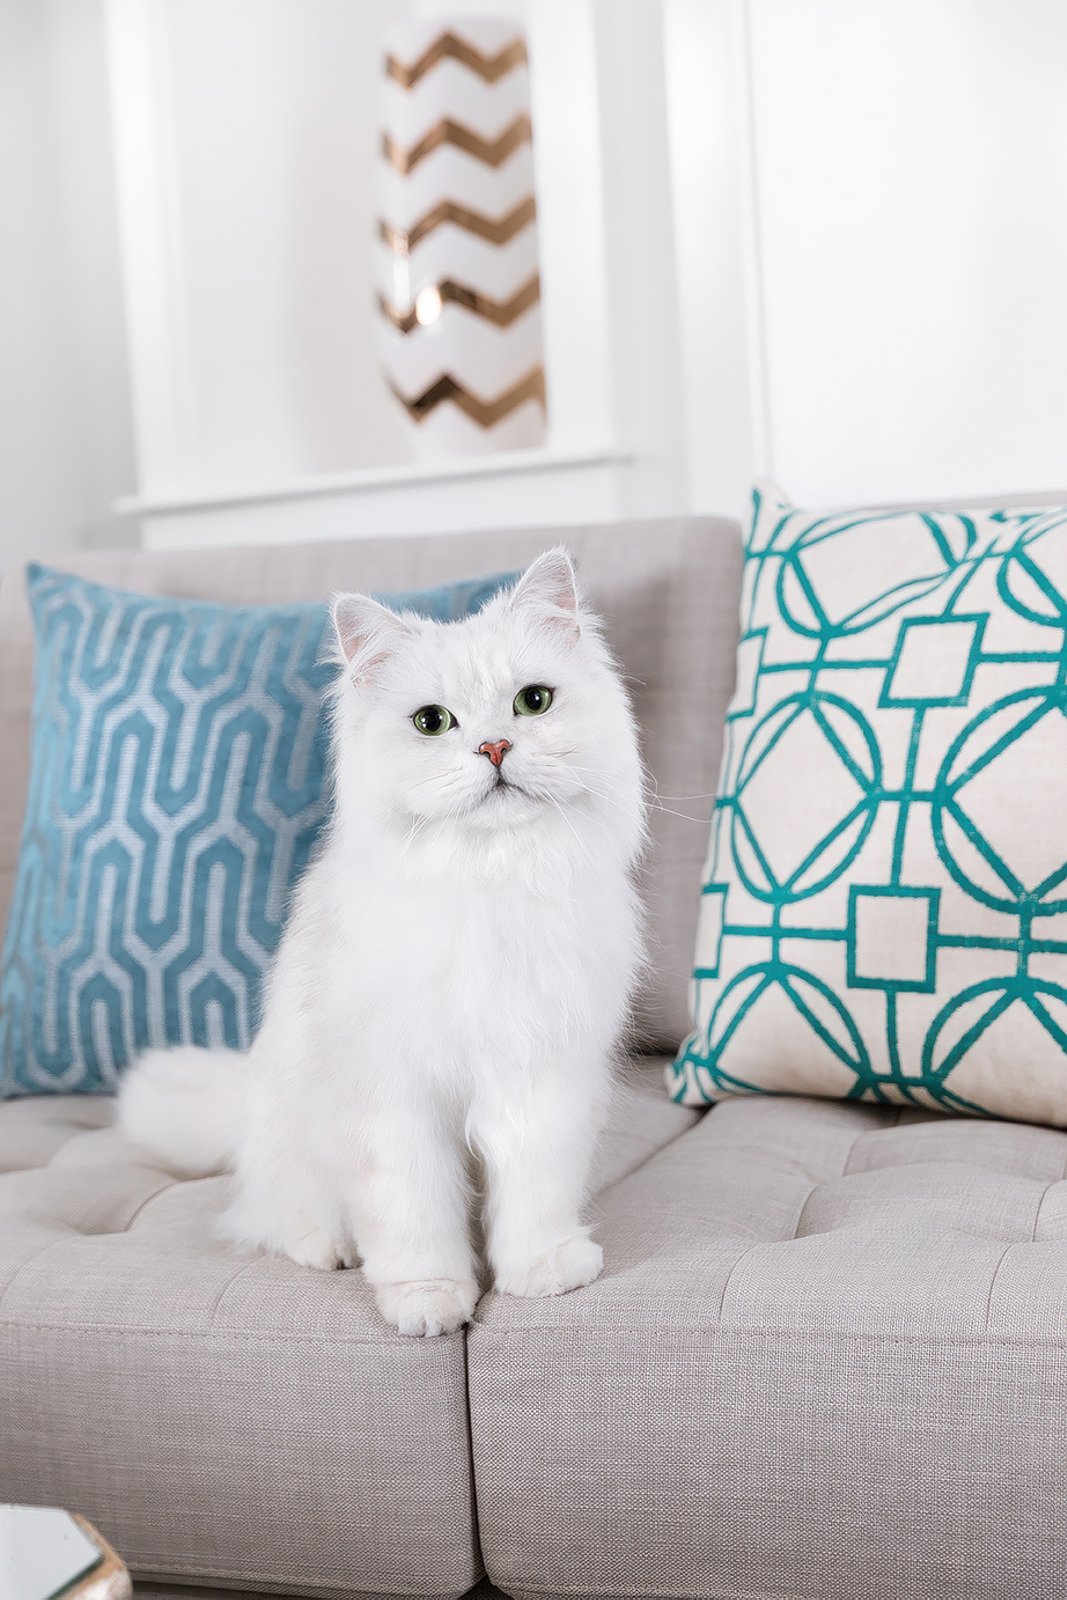 A fluffy white cat with green eyes sits on a light gray couch adorned with two decorative cushions featuring geometric patterns in shades of blue and teal. The background shows a white wall with a mirror that has a chevron design.